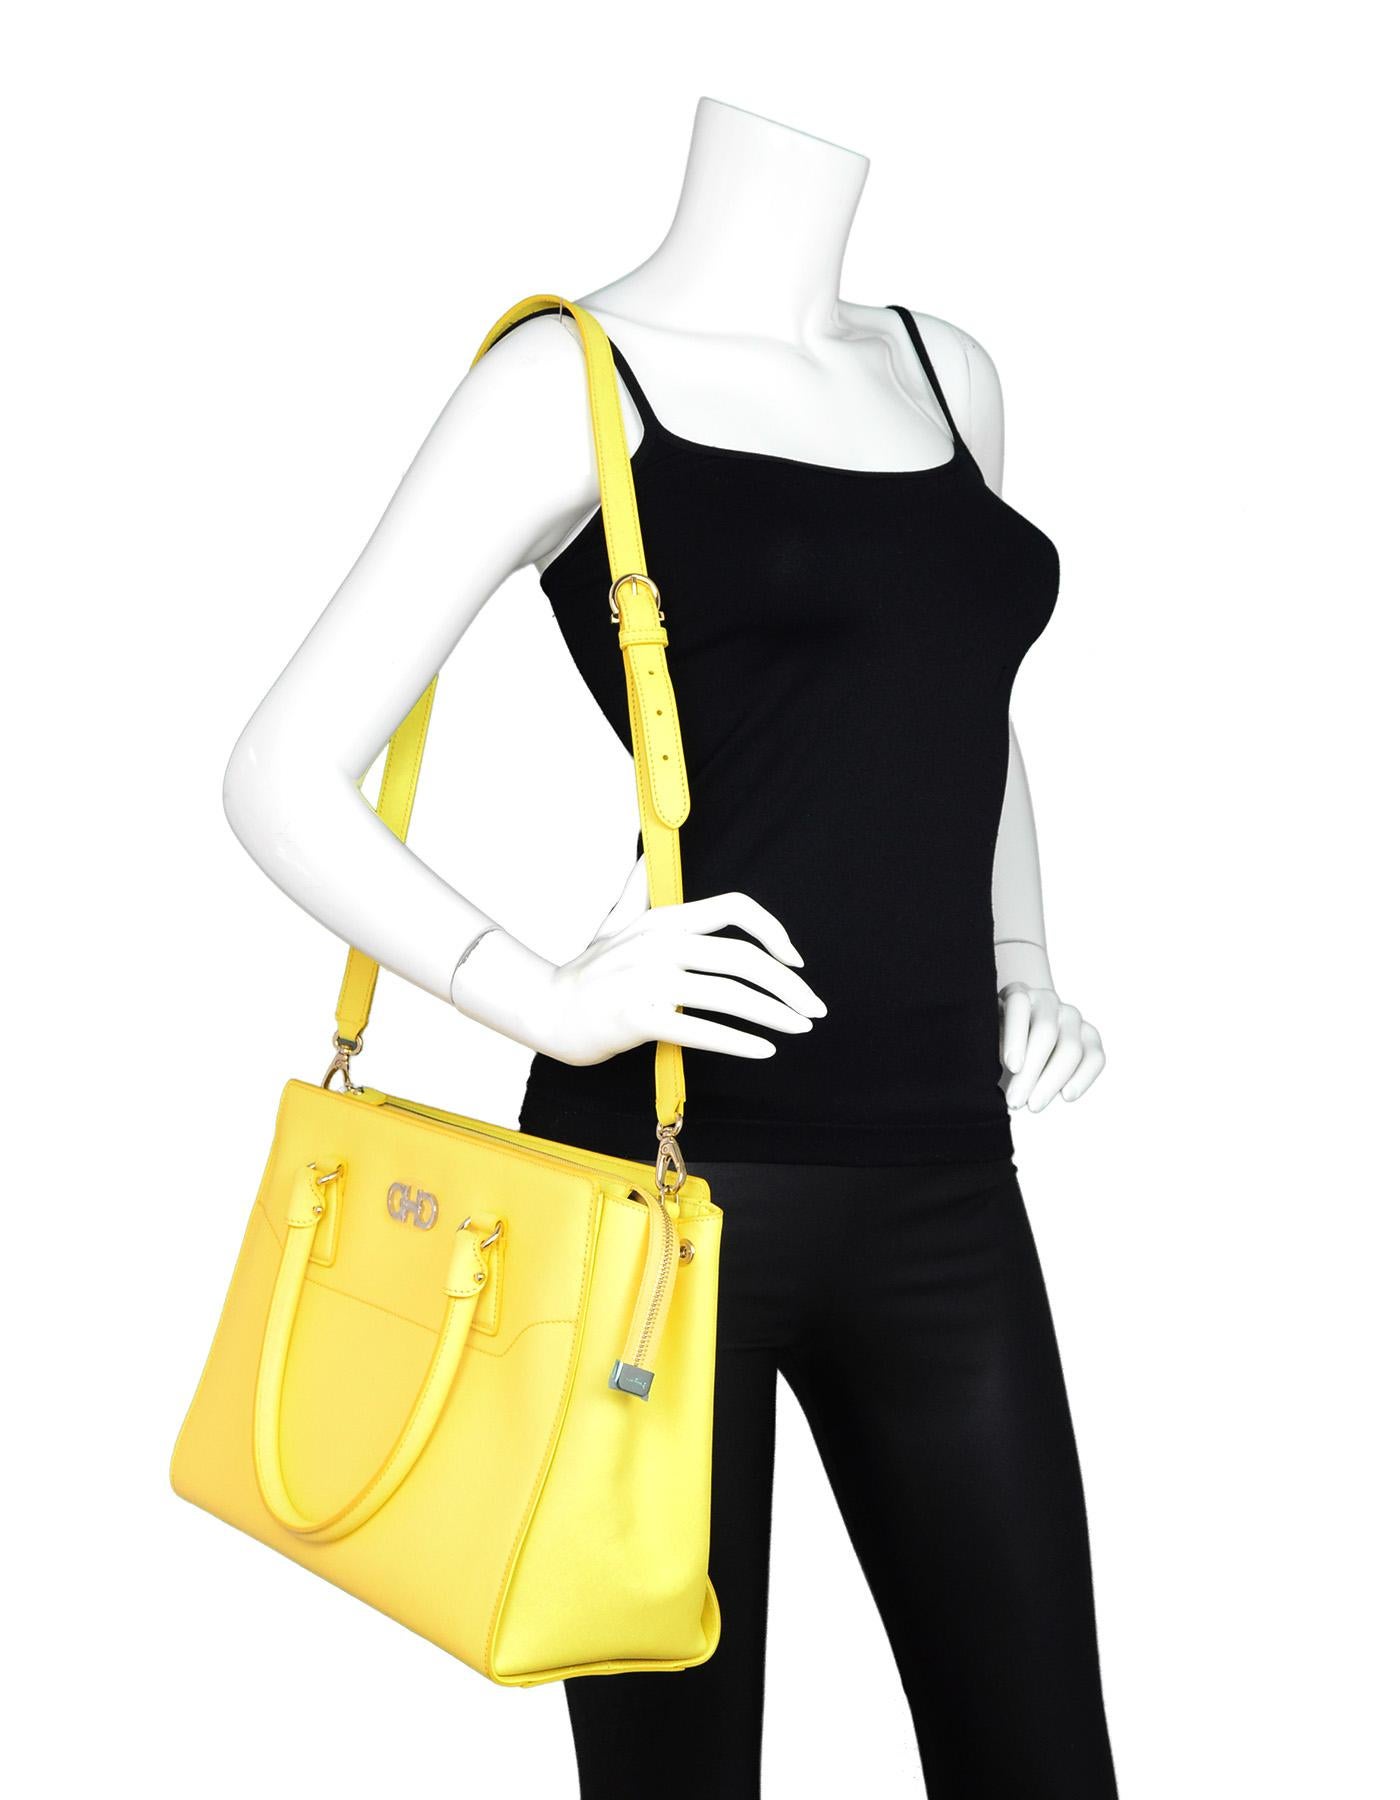 Salvatore Ferragamo New Mimosa Yellow Large Gianco Beky Saffiano Textured Leather Double Shoulder Handle Tote Bag W/ Crossbody Strap. Includes Tags And Dust Bag.

Made In: Italy
Color: Mimosa yellow
Hardware: Goldtone
Materials: Saffiano